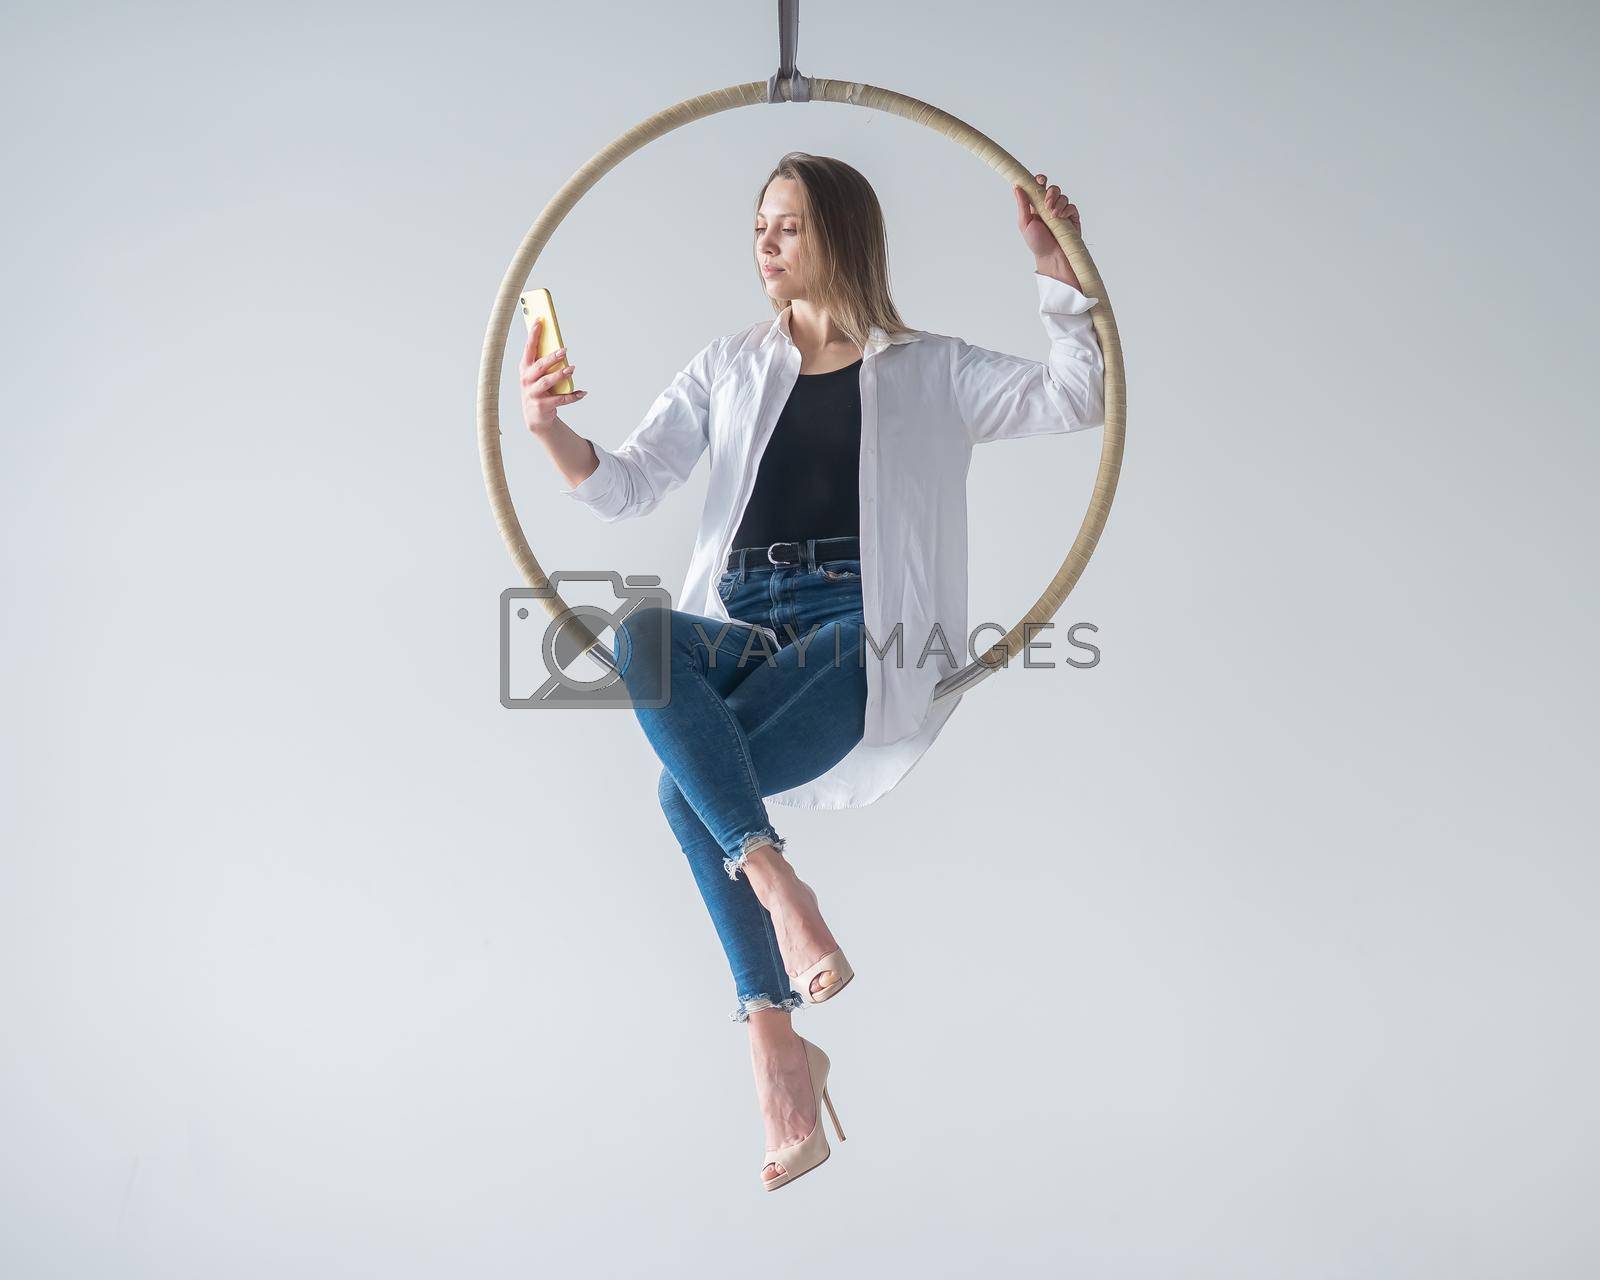 Royalty free image of Caucasian woman gymnast on an aerial hoop takes a selfie on a smartphone. by mrwed54